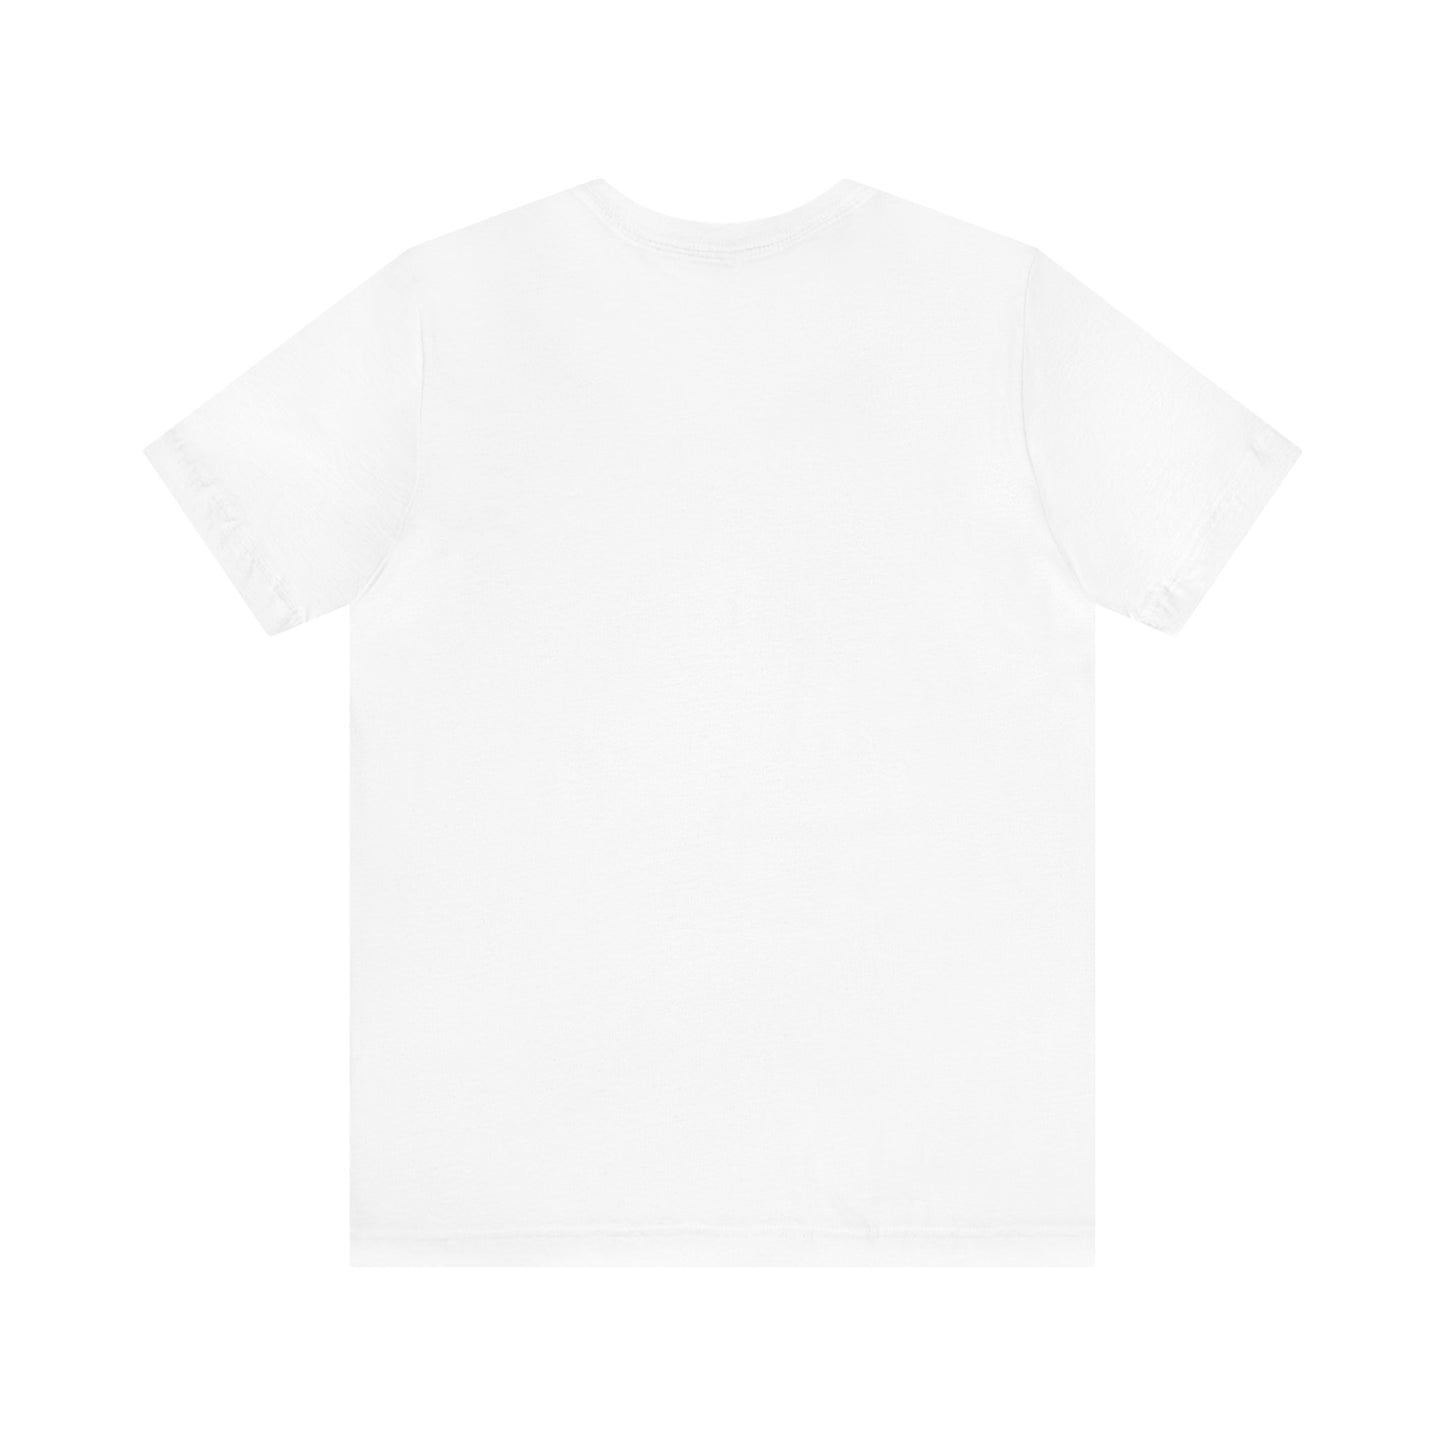 Collin Oliver T-Shirt